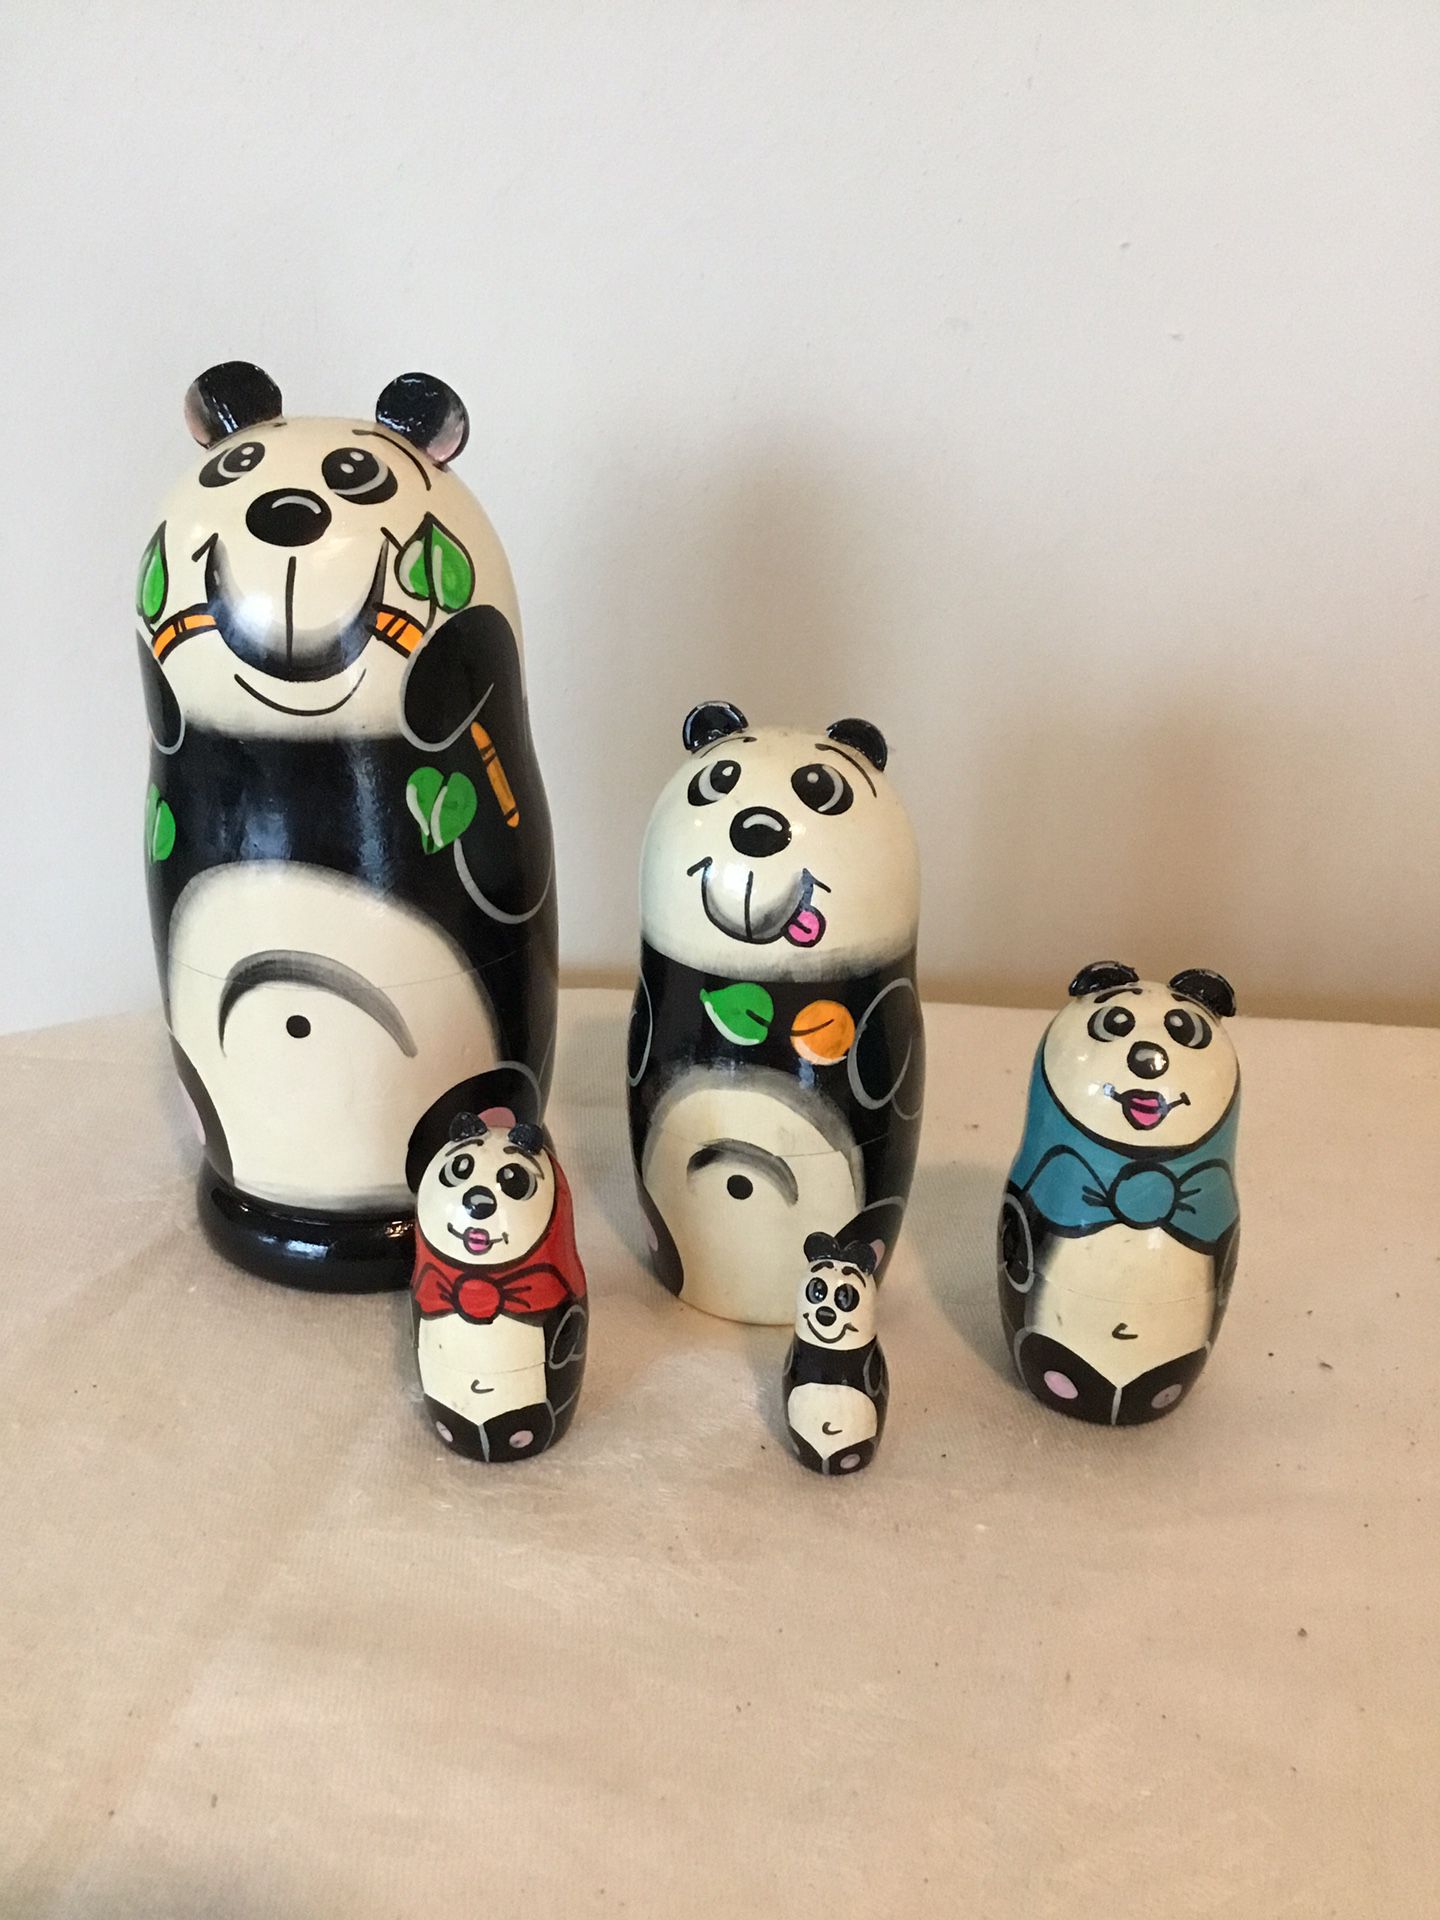 Wood Russian Nesting Doll Pandas 5 pcs 5” inches chewing bamboo orig $65